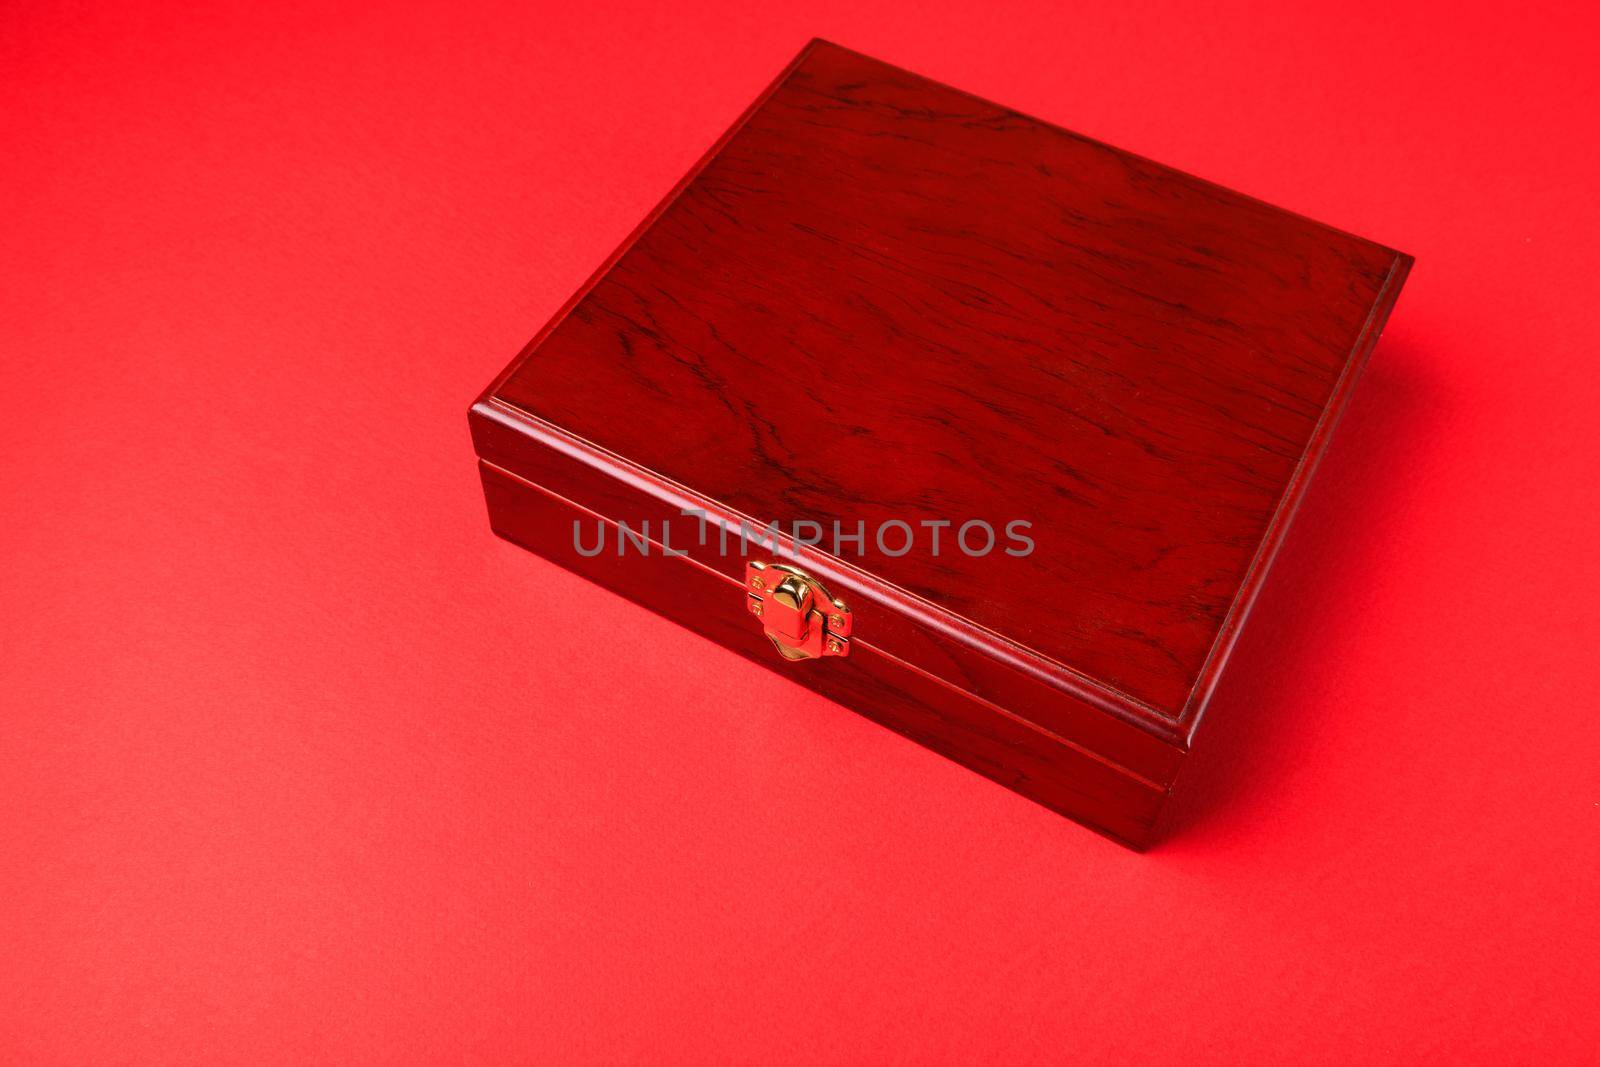 Gift set of corkscrew and removable lids. Wine corks and bottle openers in a wooden box on a red background.